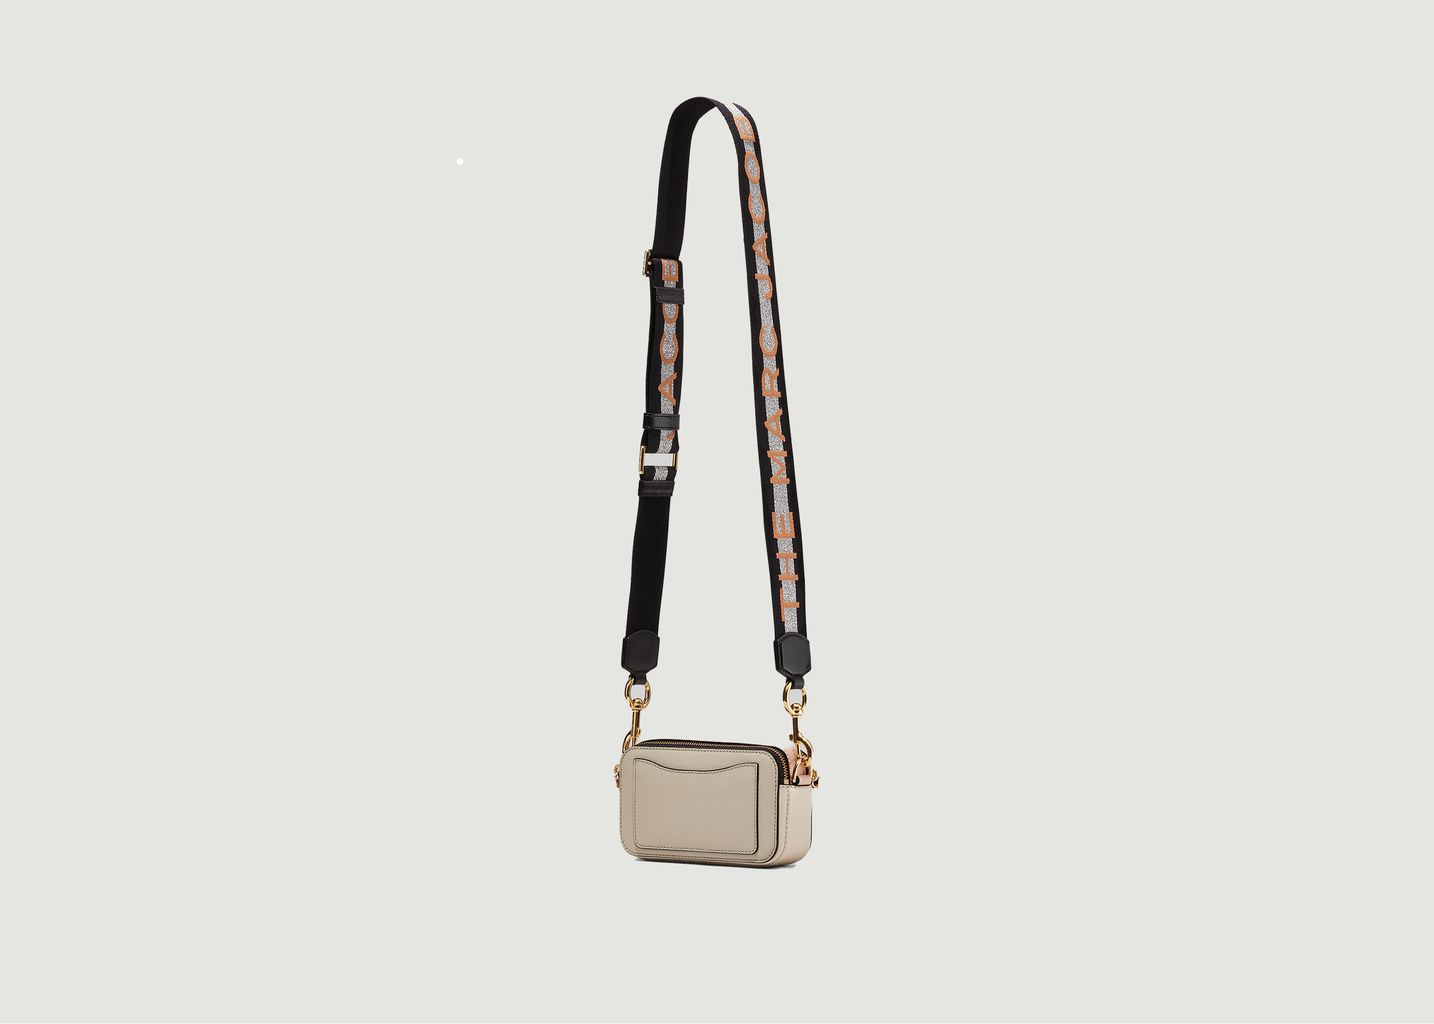 The Snapshot leather bag - Marc Jacobs